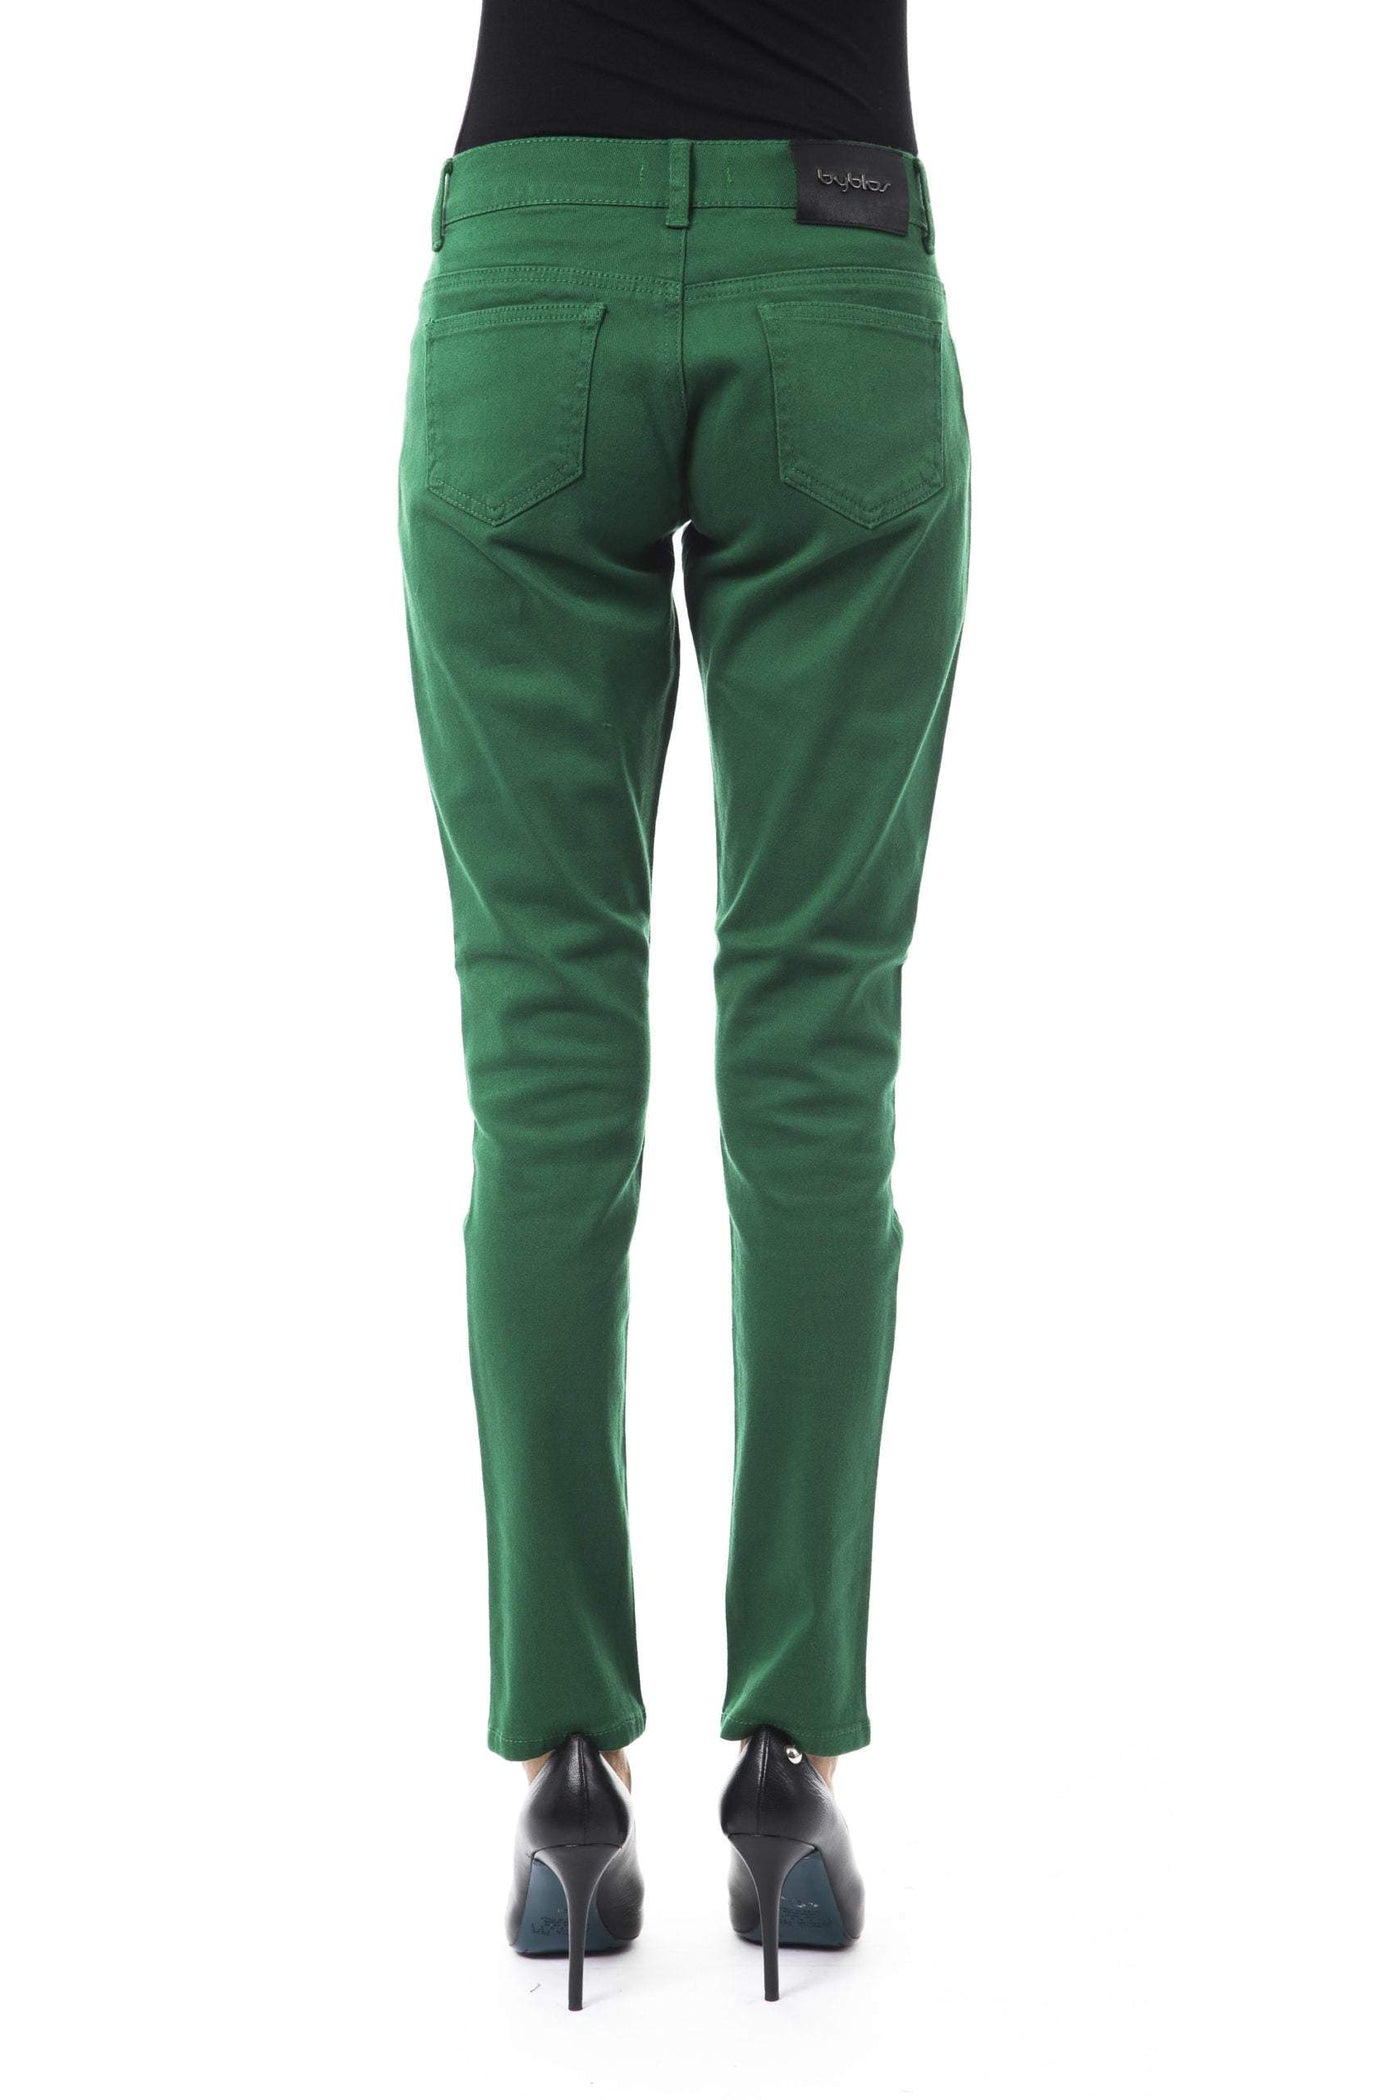 BYBLOS Green Cotton Jeans & Pant BYBLOS, feed-1, Green, Jeans & Pants - Women - Clothing, W25 | IT39 at SEYMAYKA